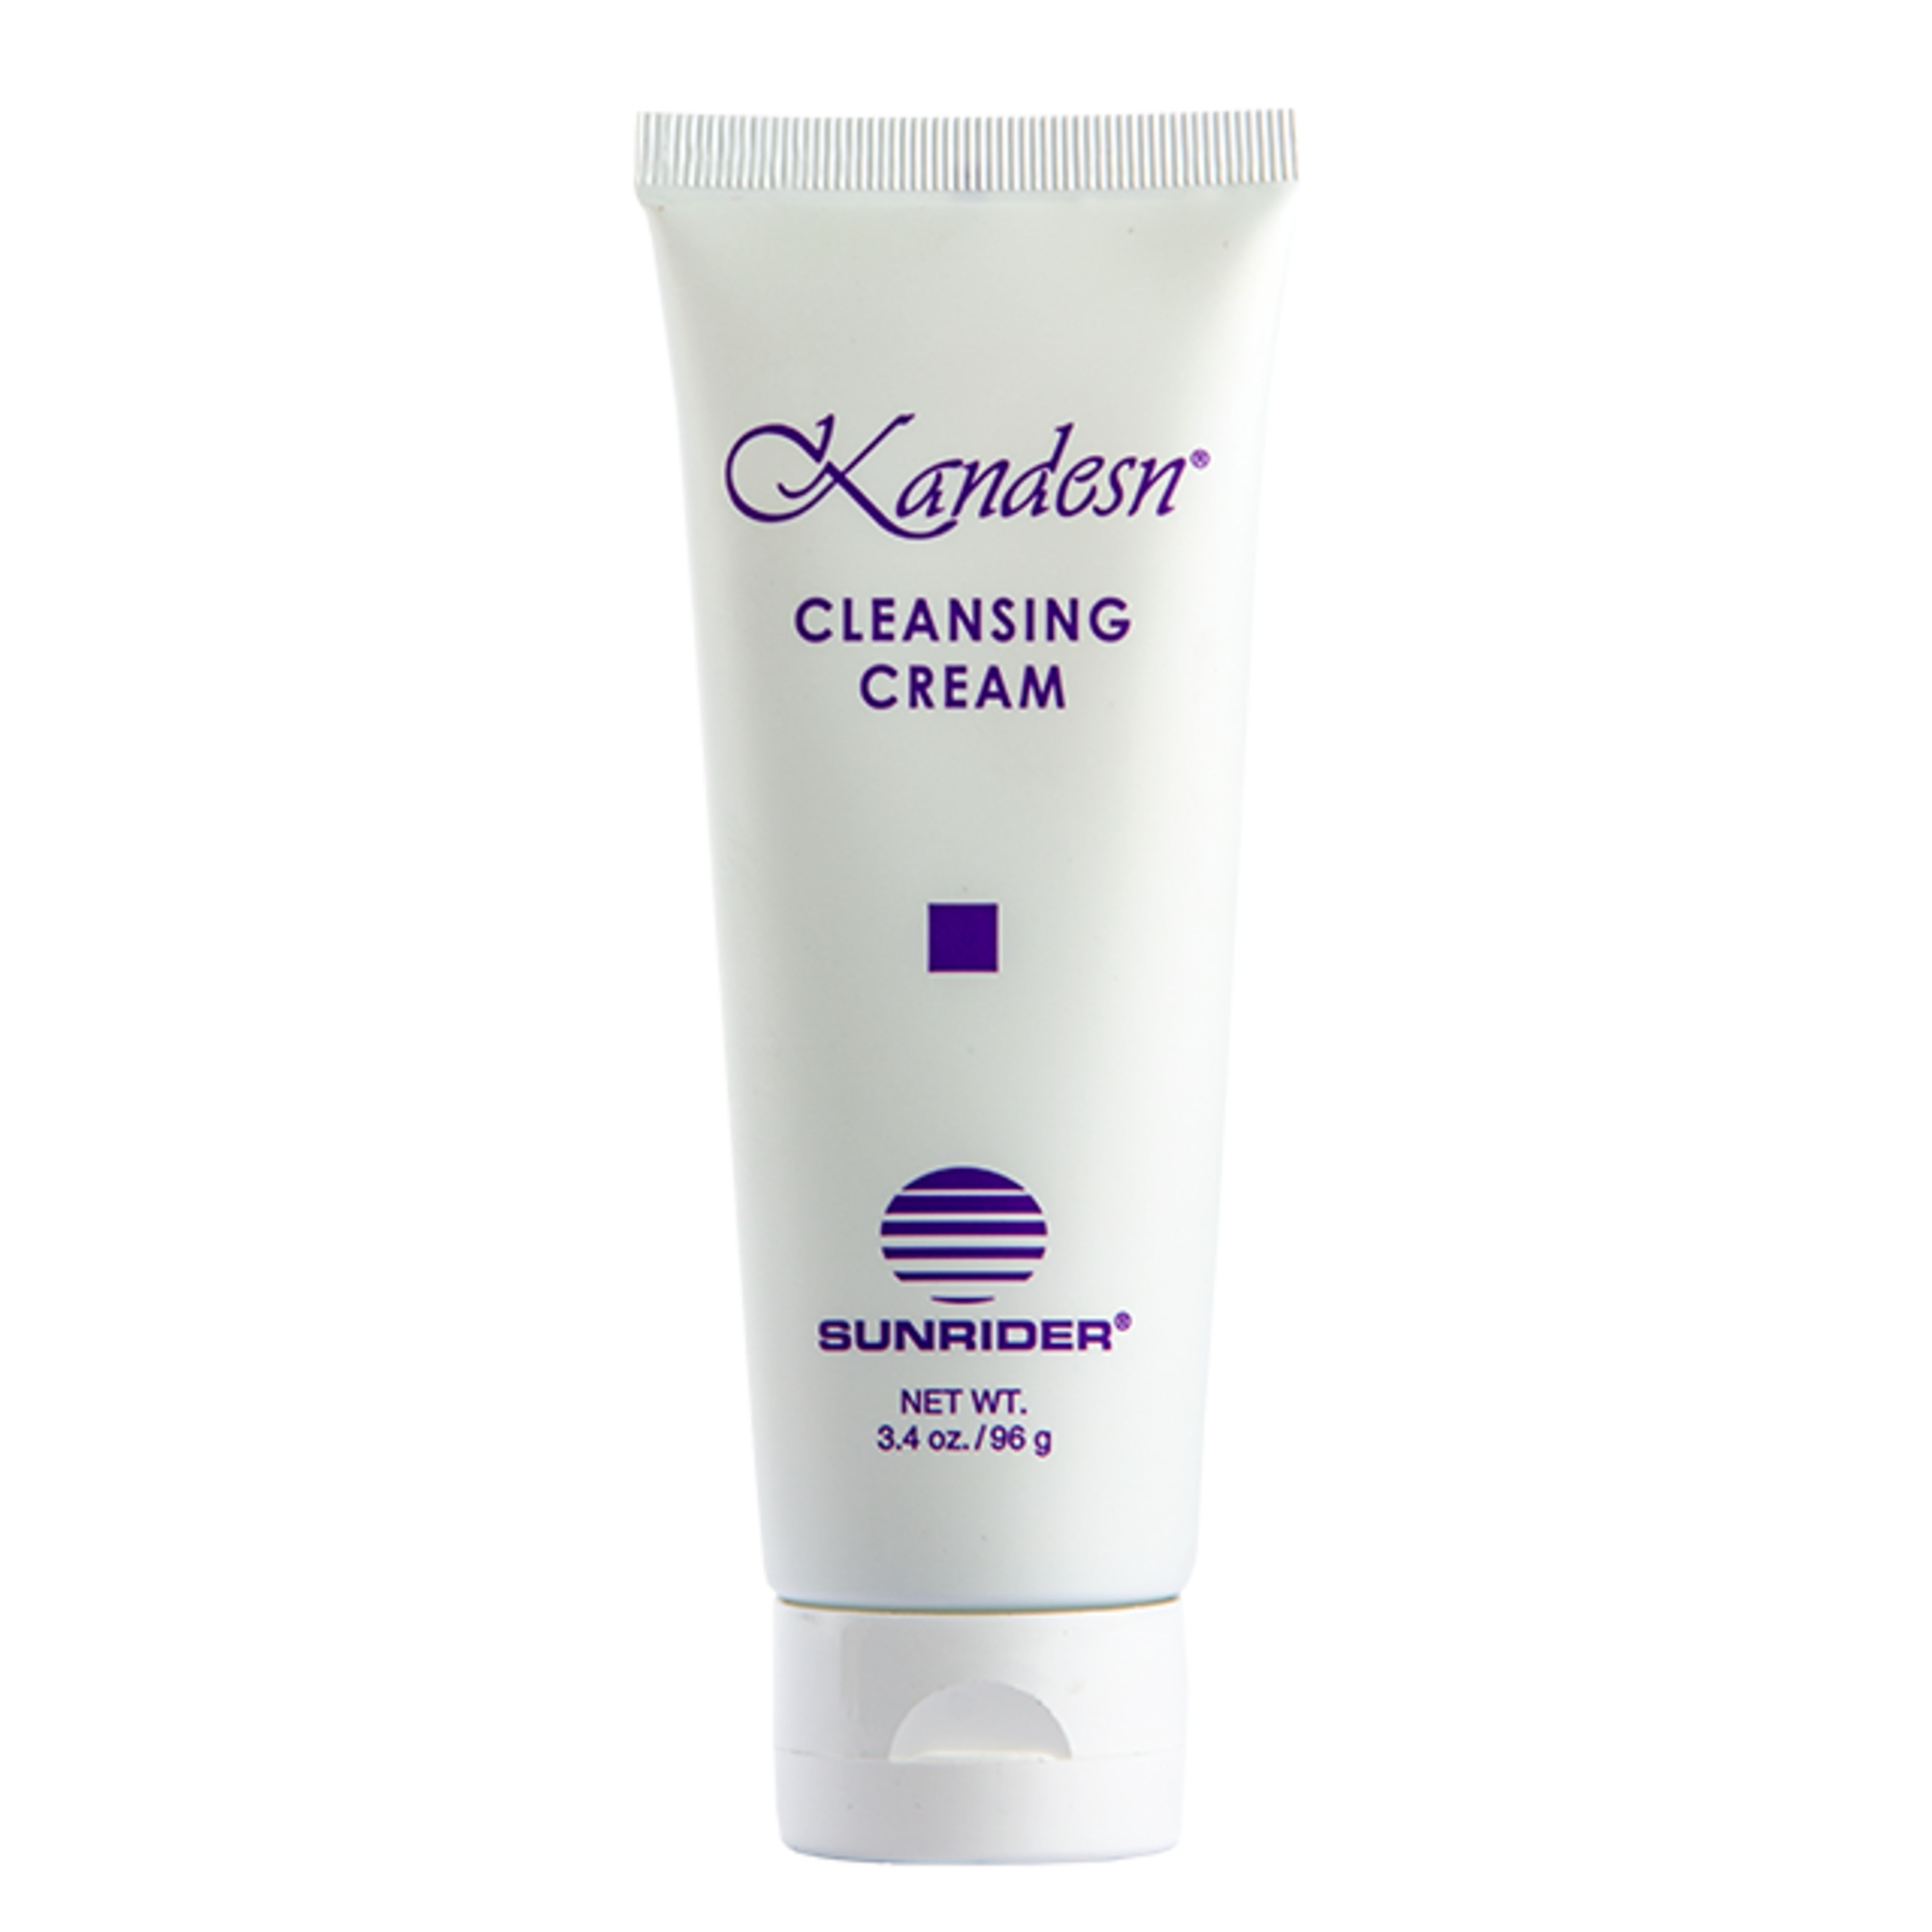 0127034-Kandesn-Cleansing-Cream-3.4oz-In.png